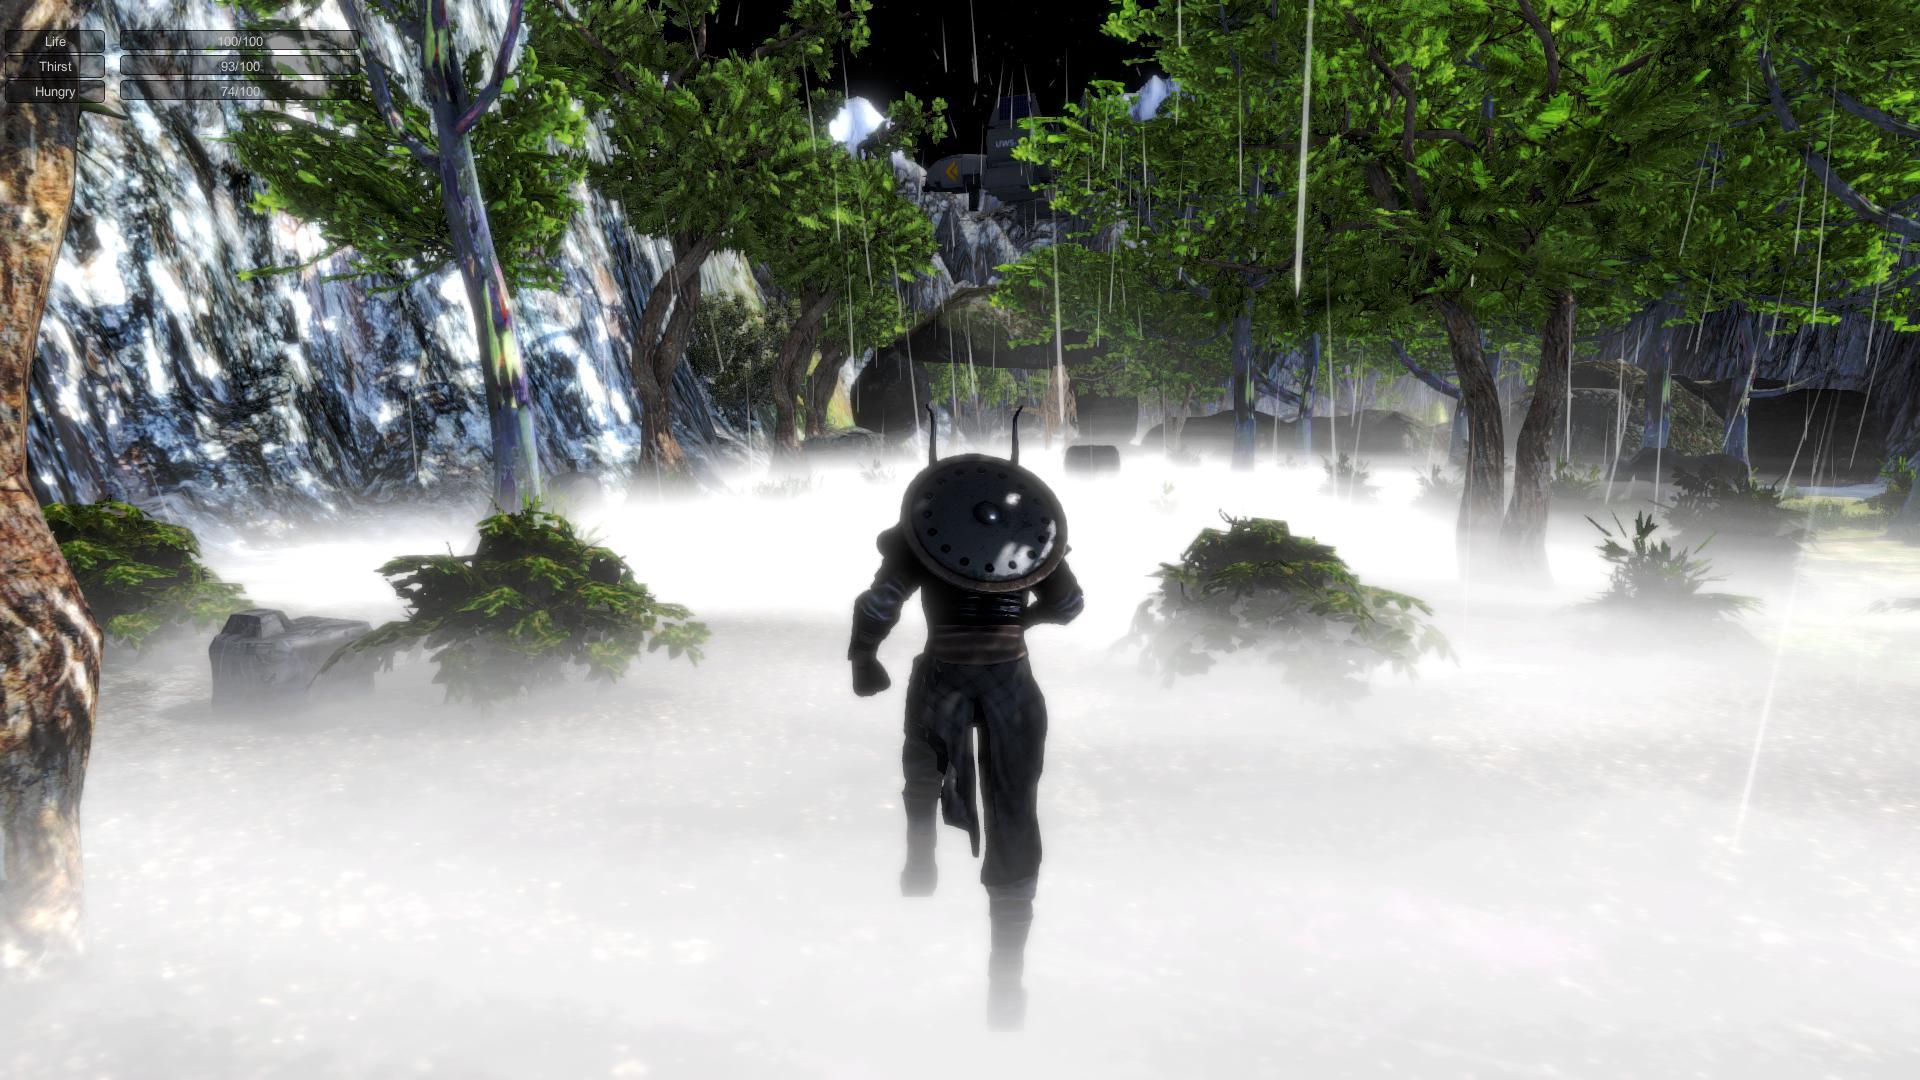 Screenshot №3 from game The Last Hope